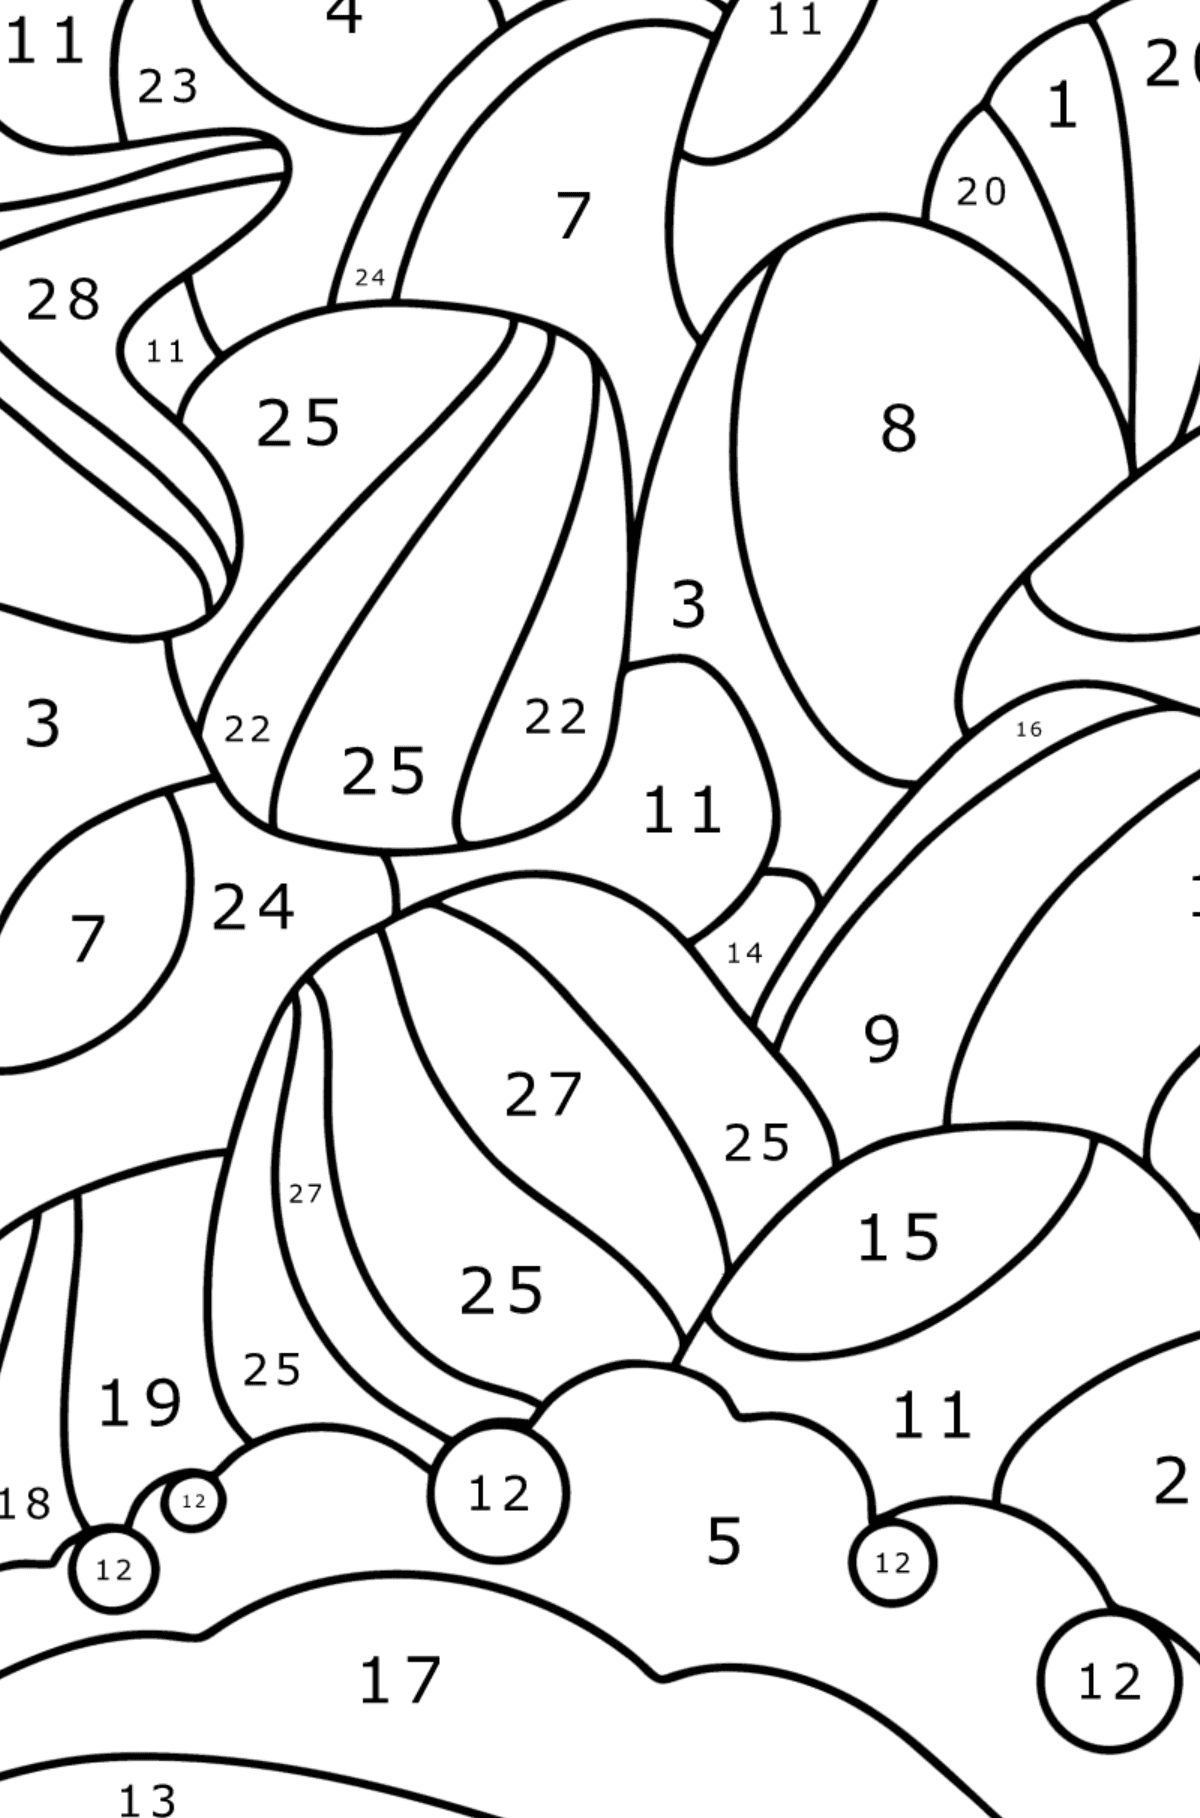 Doodle Coloring Page for Kids - Sea Pebbles - Coloring by Numbers for Kids